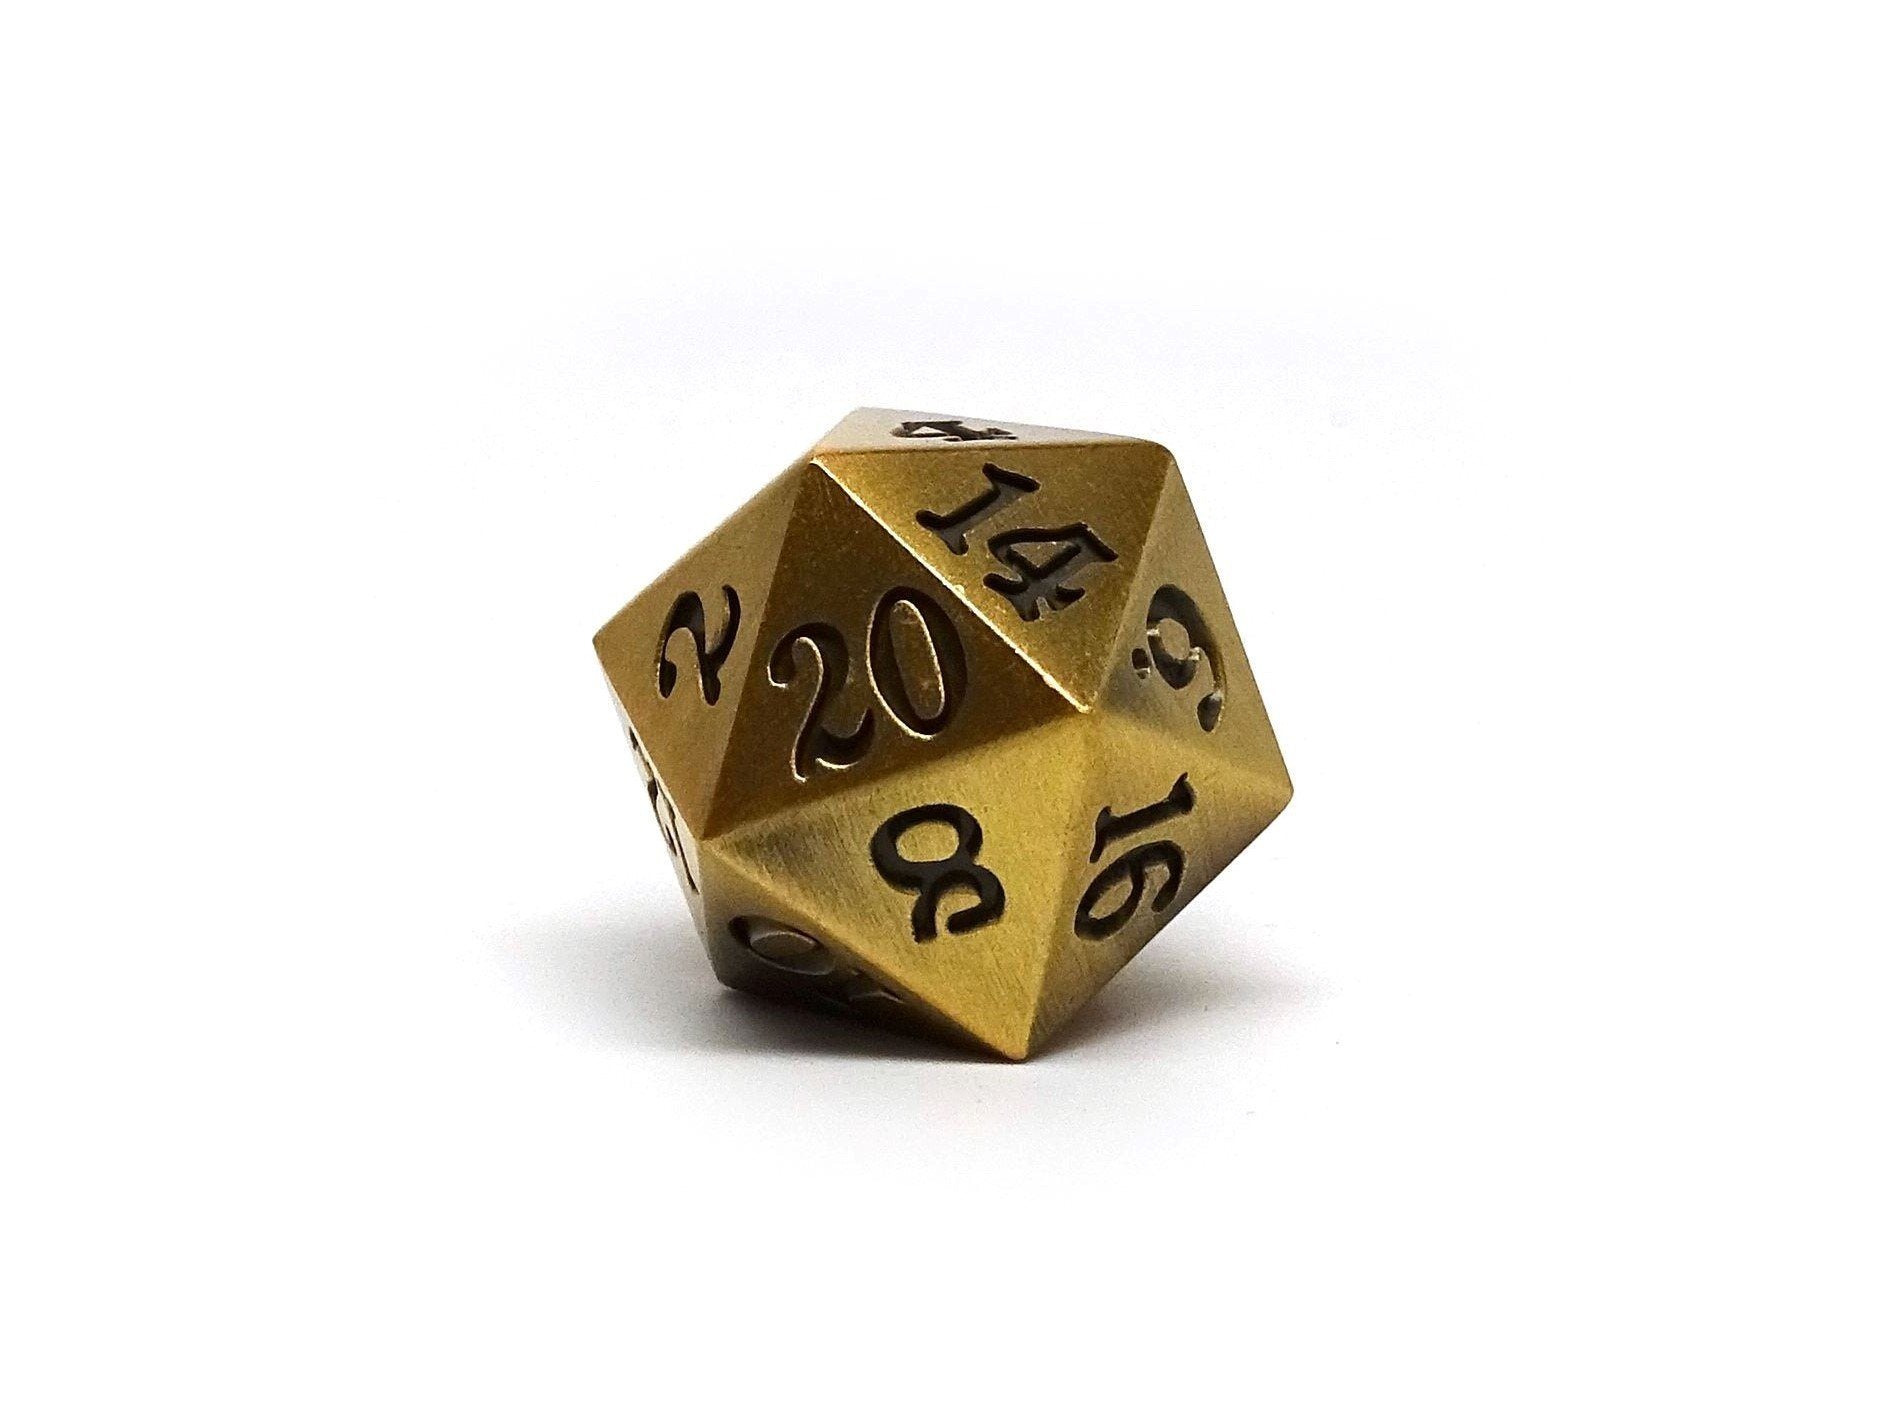 Legendary Gold D20 Dice - Metal Single 20 Sided Dice - Easy Roller